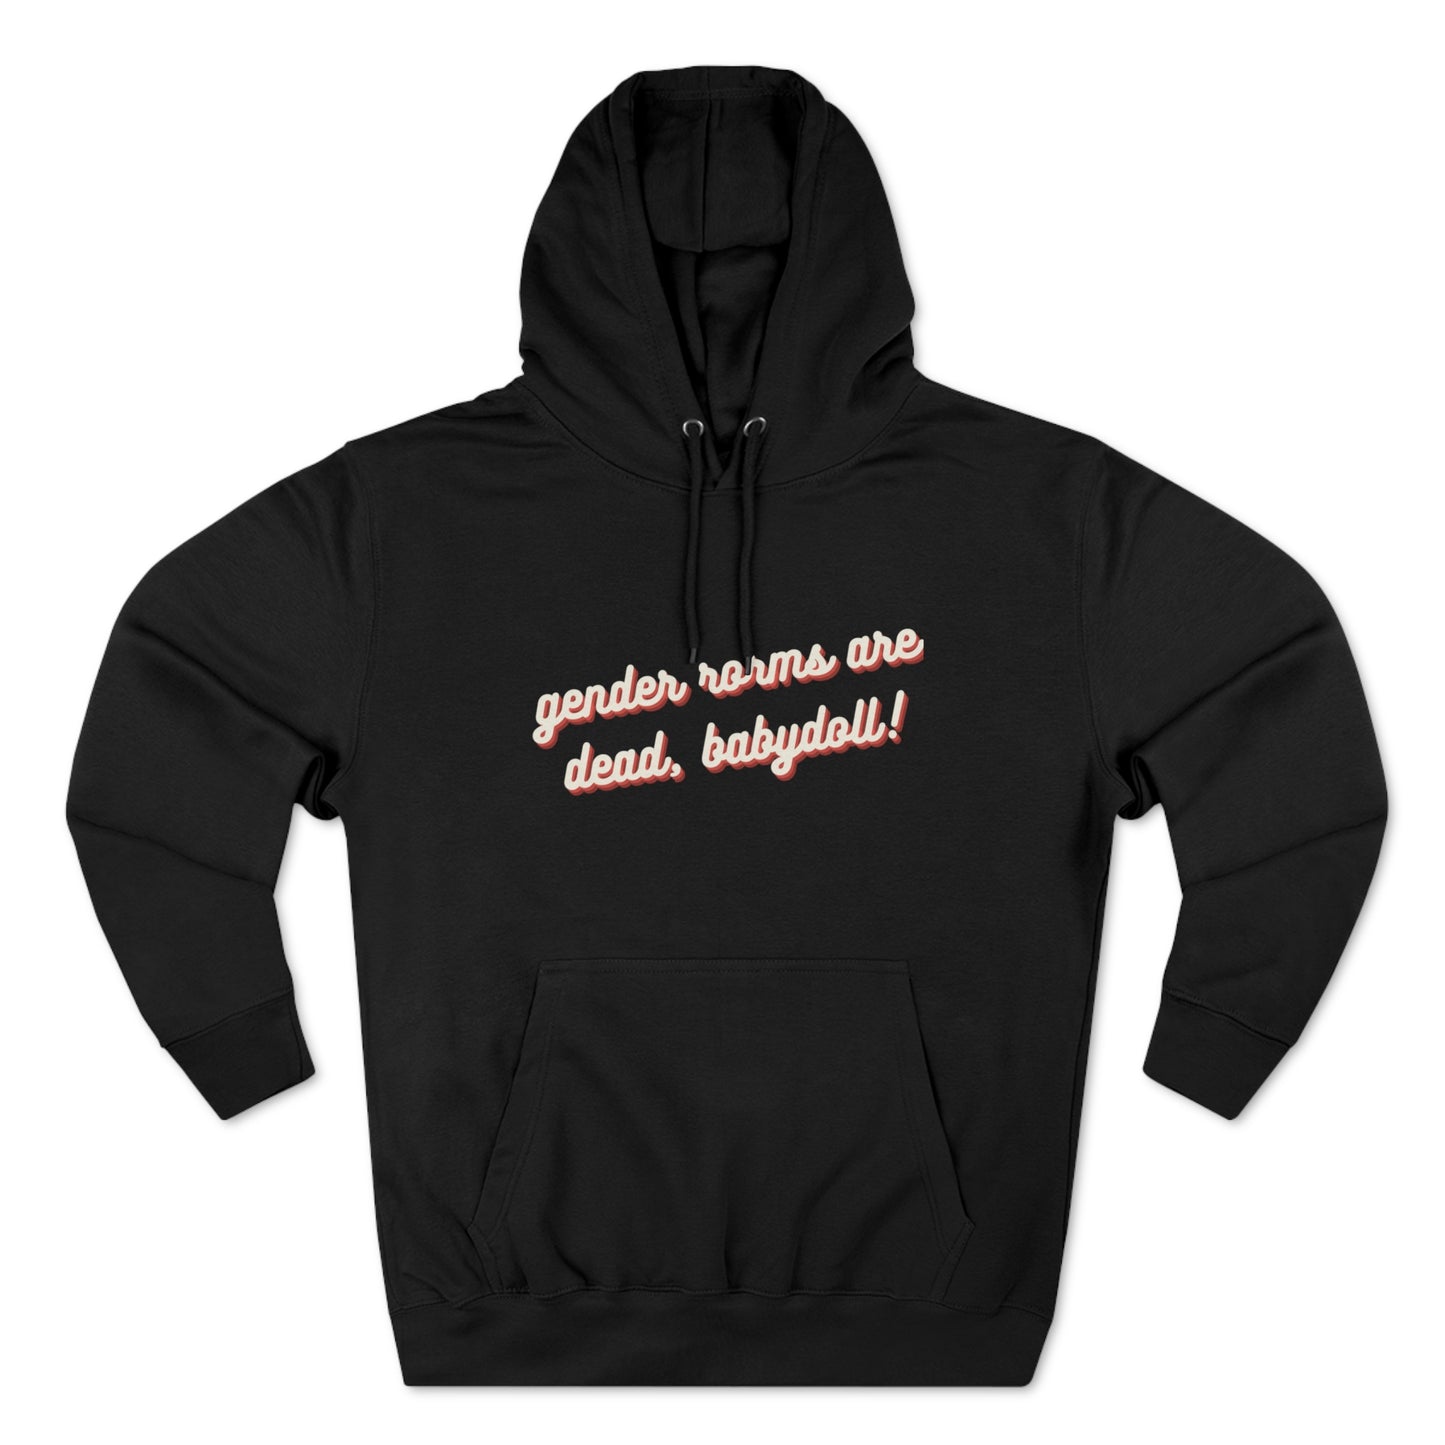 Gender Norms Are Dead Babydoll !!! Hoodie 2XL-XS